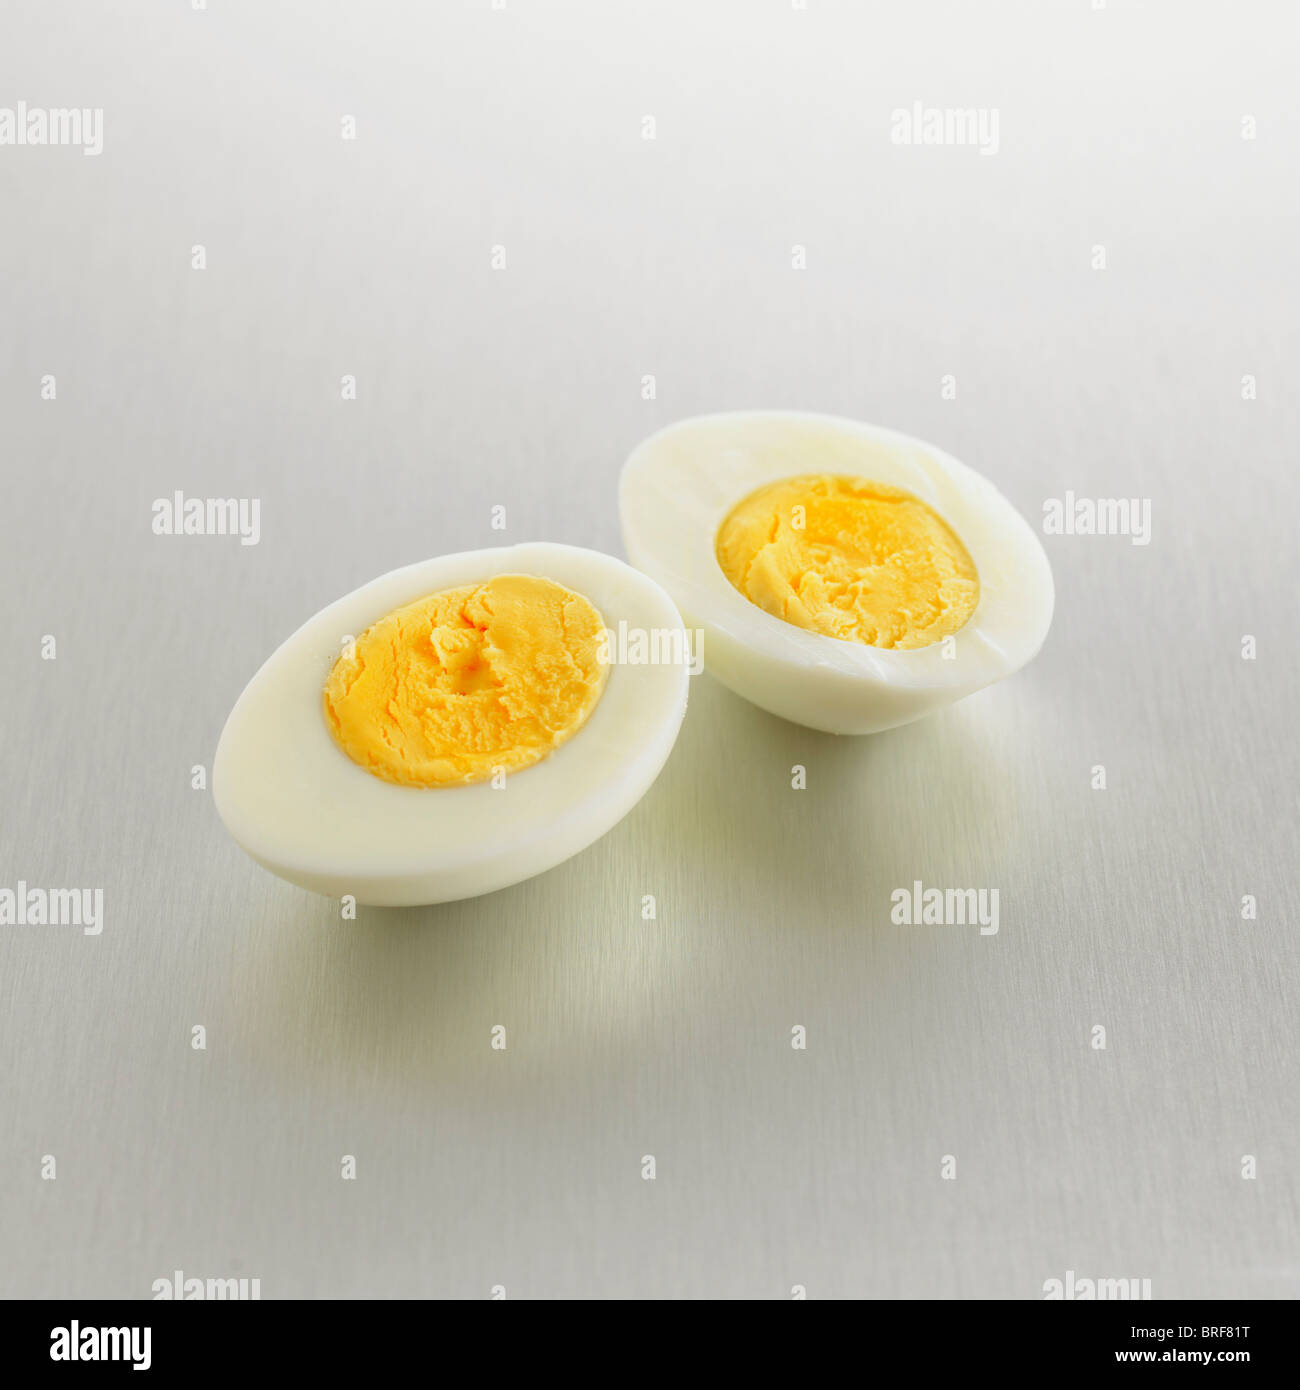 Two halves showing the yolks of a hard boiled egg Stock Photo